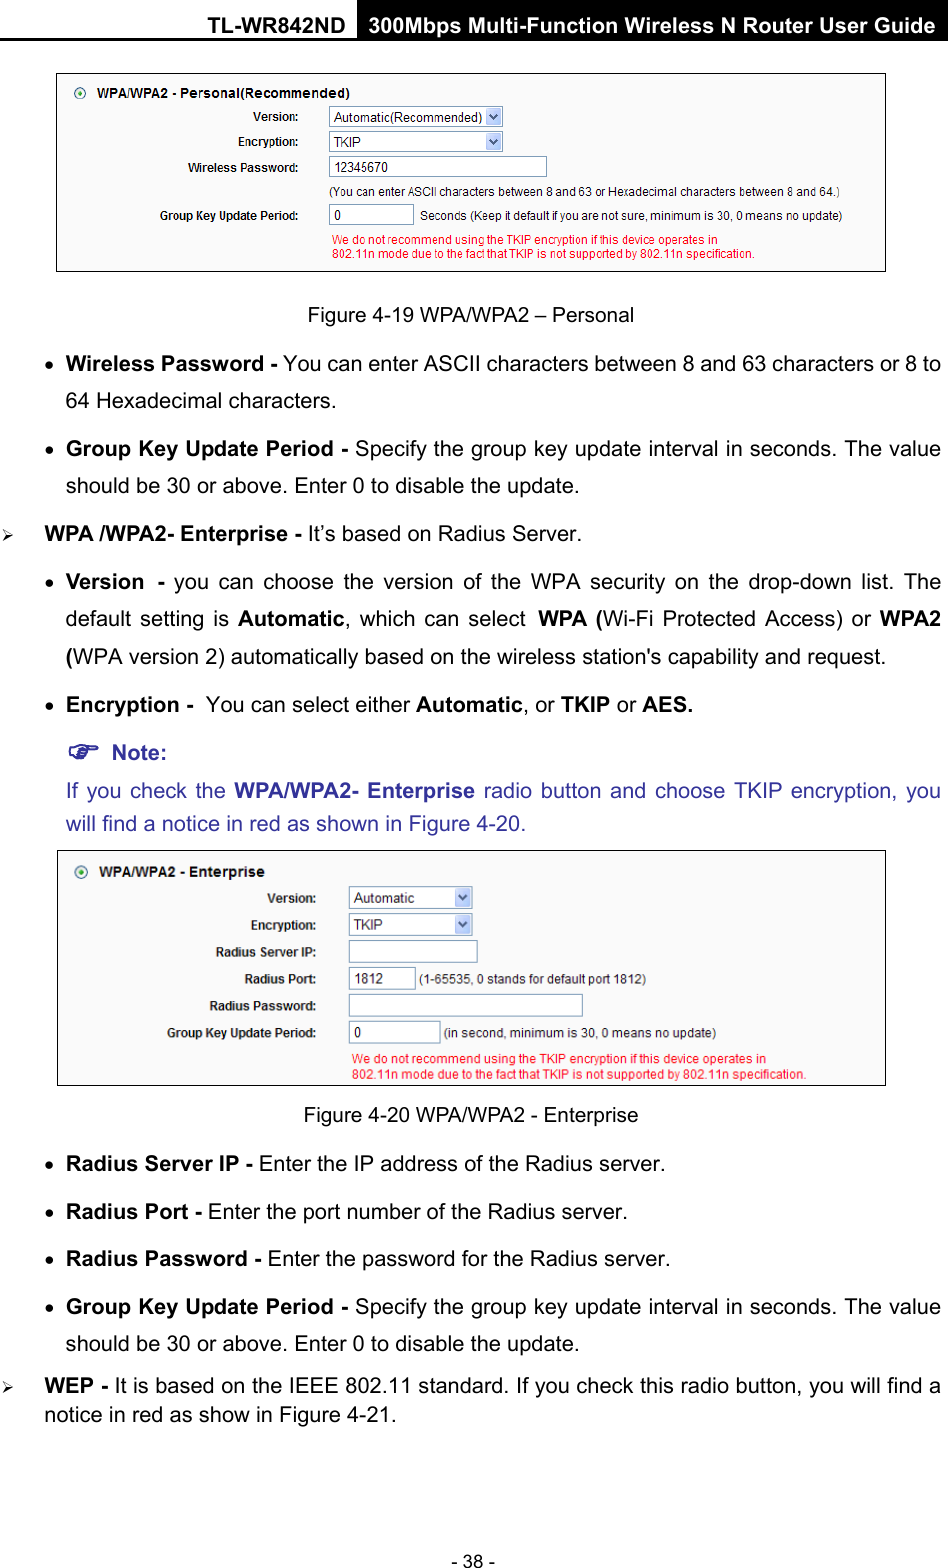 TL-WR842ND 300Mbps Multi-Function Wireless N Router User Guide  - 38 -  Figure 4-19 WPA/WPA2 – Personal • Wireless Password - You can enter ASCII characters between 8 and 63 characters or 8 to 64 Hexadecimal characters. • Group Key Update Period - Specify the group key update interval in seconds. The value should be 30 or above. Enter 0 to disable the update.  WPA /WPA2- Enterprise - It’s based on Radius Server. • Version - you can choose the version of the WPA security on the drop-down list. The default setting is Automatic, which can select WPA  (Wi-Fi Protected Access)  or  WPA2 (WPA version 2) automatically based on the wireless station&apos;s capability and request. • Encryption - You can select either Automatic, or TKIP or AES.  Note: If you check the WPA/WPA2- Enterprise radio button and choose TKIP encryption, you will find a notice in red as shown in Figure 4-20.  Figure 4-20 WPA/WPA2 - Enterprise • Radius Server IP - Enter the IP address of the Radius server. • Radius Port - Enter the port number of the Radius server. • Radius Password - Enter the password for the Radius server. • Group Key Update Period - Specify the group key update interval in seconds. The value should be 30 or above. Enter 0 to disable the update.  WEP - It is based on the IEEE 802.11 standard. If you check this radio button, you will find a notice in red as show in Figure 4-21.   